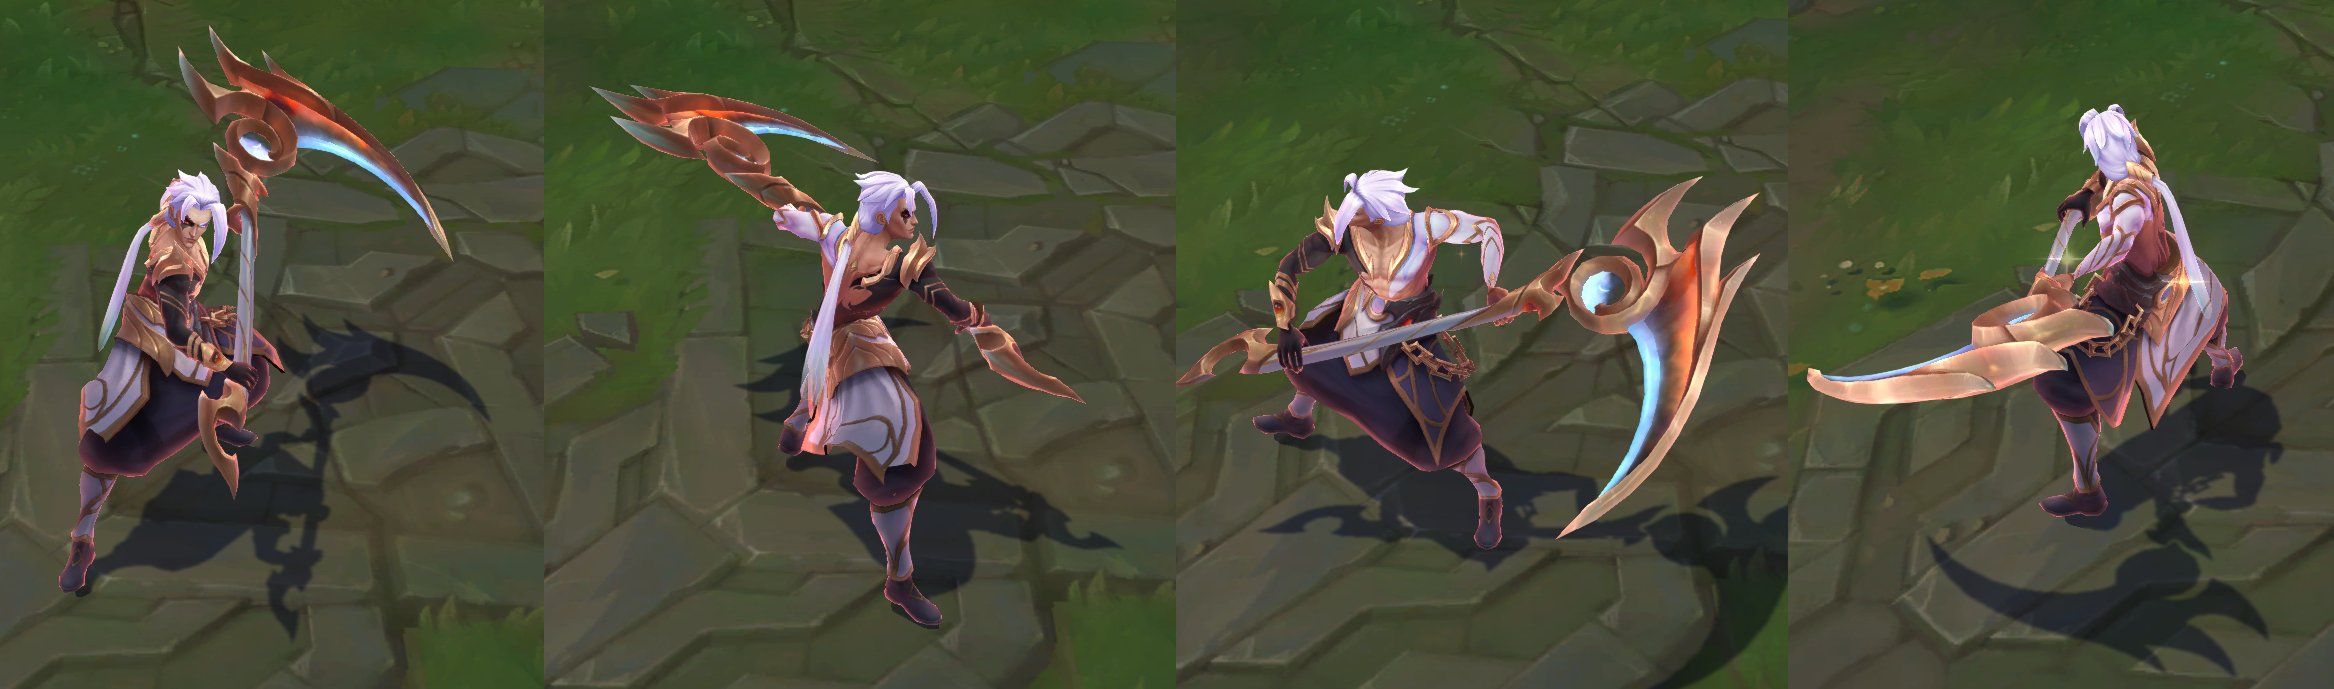 Vex and her release skin Dawnbringer Vex will also be hitting the PBE this ...